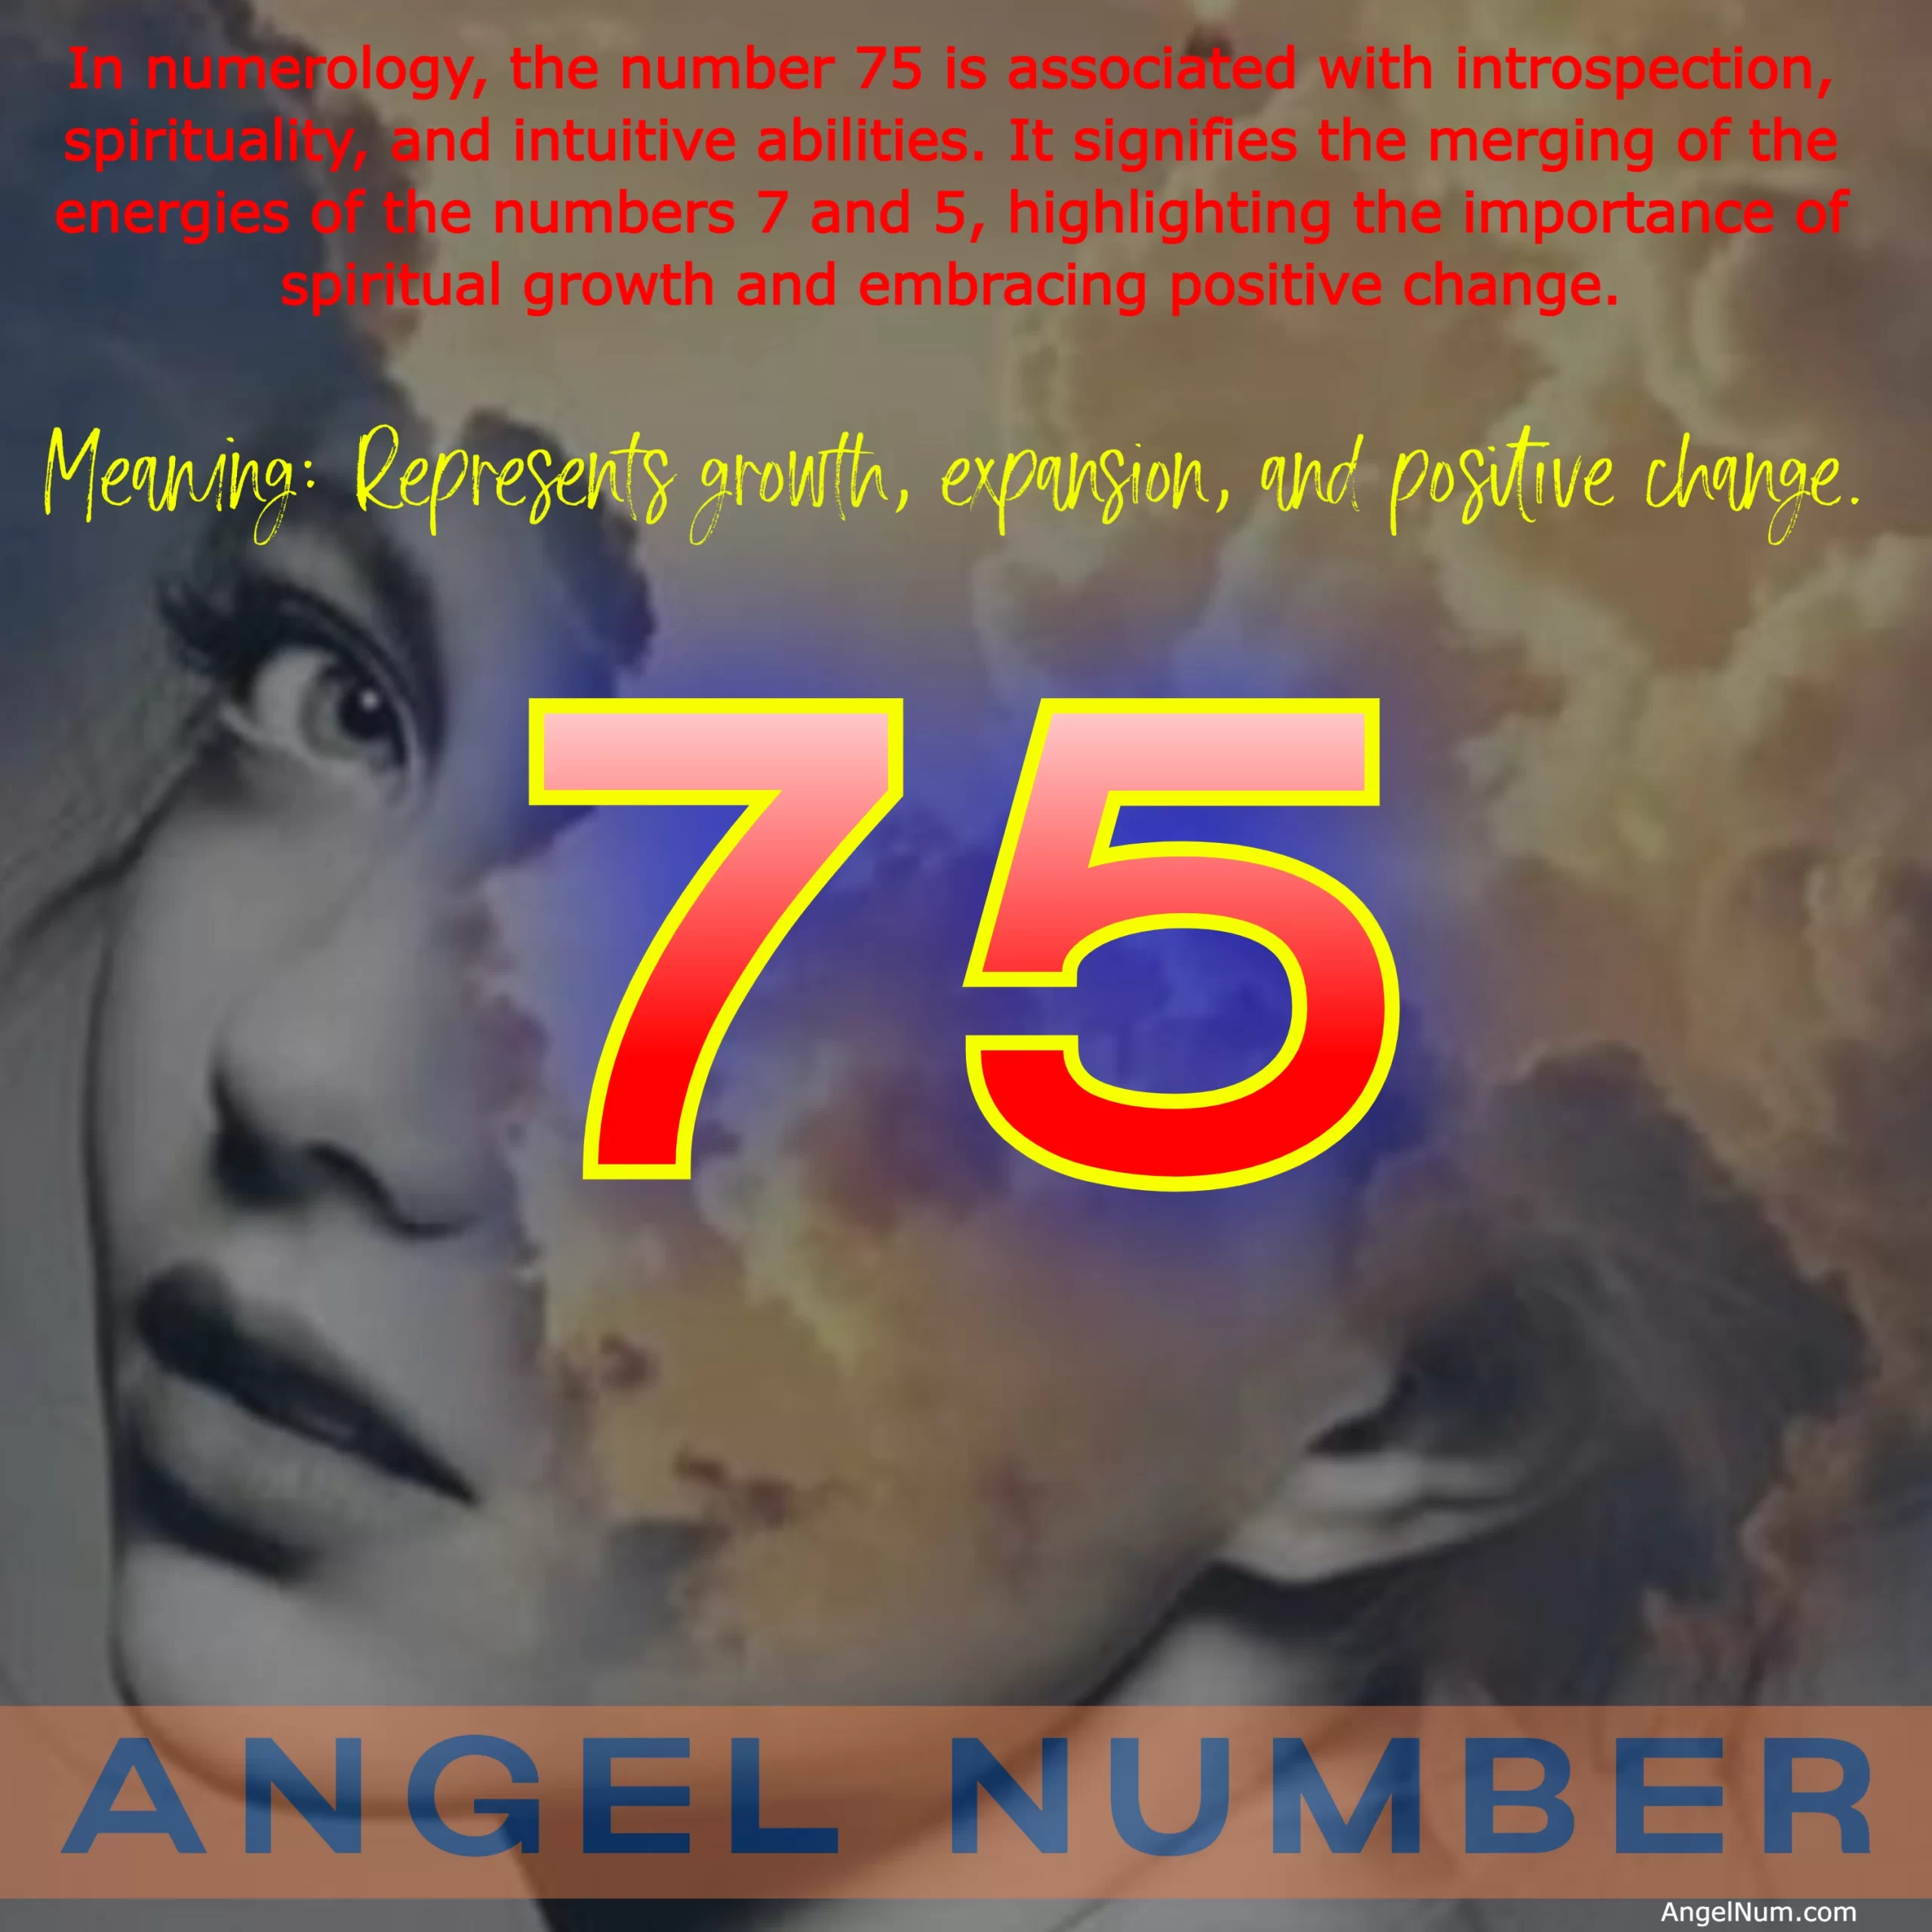 Angel Number 75: Embrace Growth, Change, and Spiritual Expansion